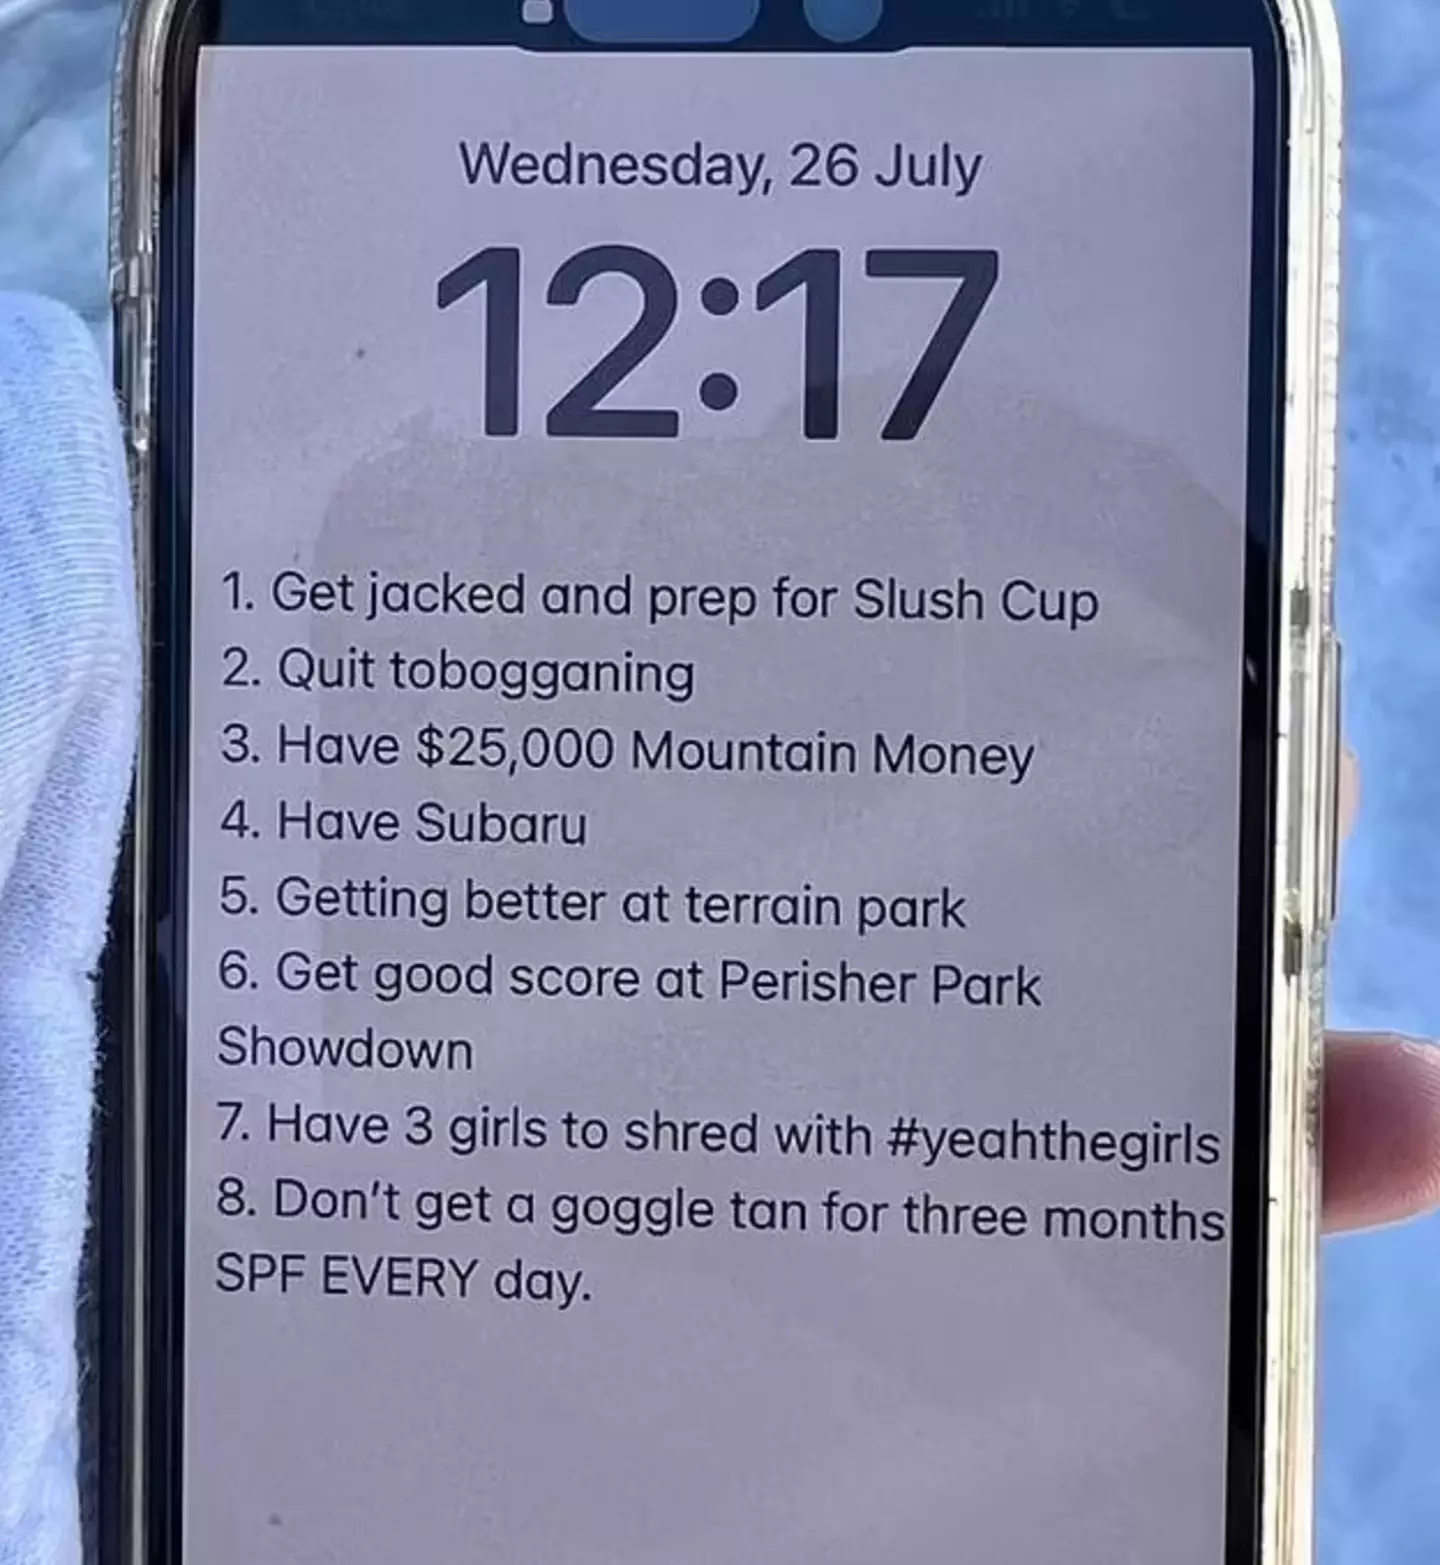 Staff at Perisher Ski Resort trolled the man by creating their own list.